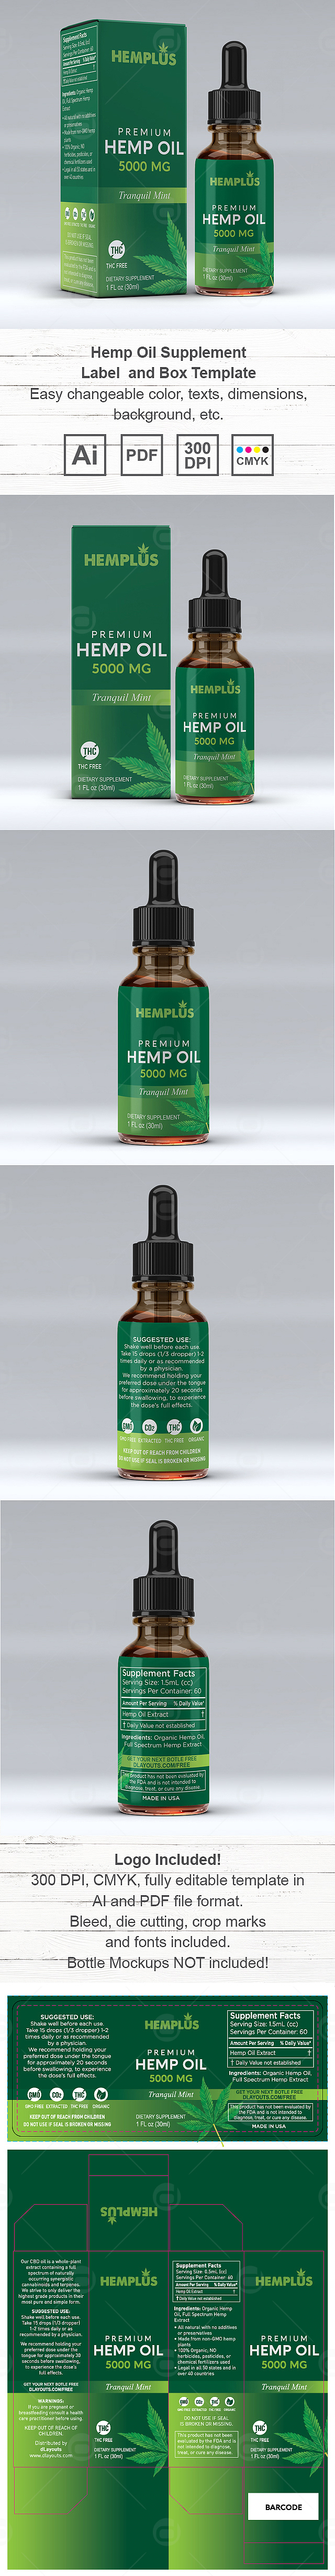 Hemp Oil Supplement Label and Box Template